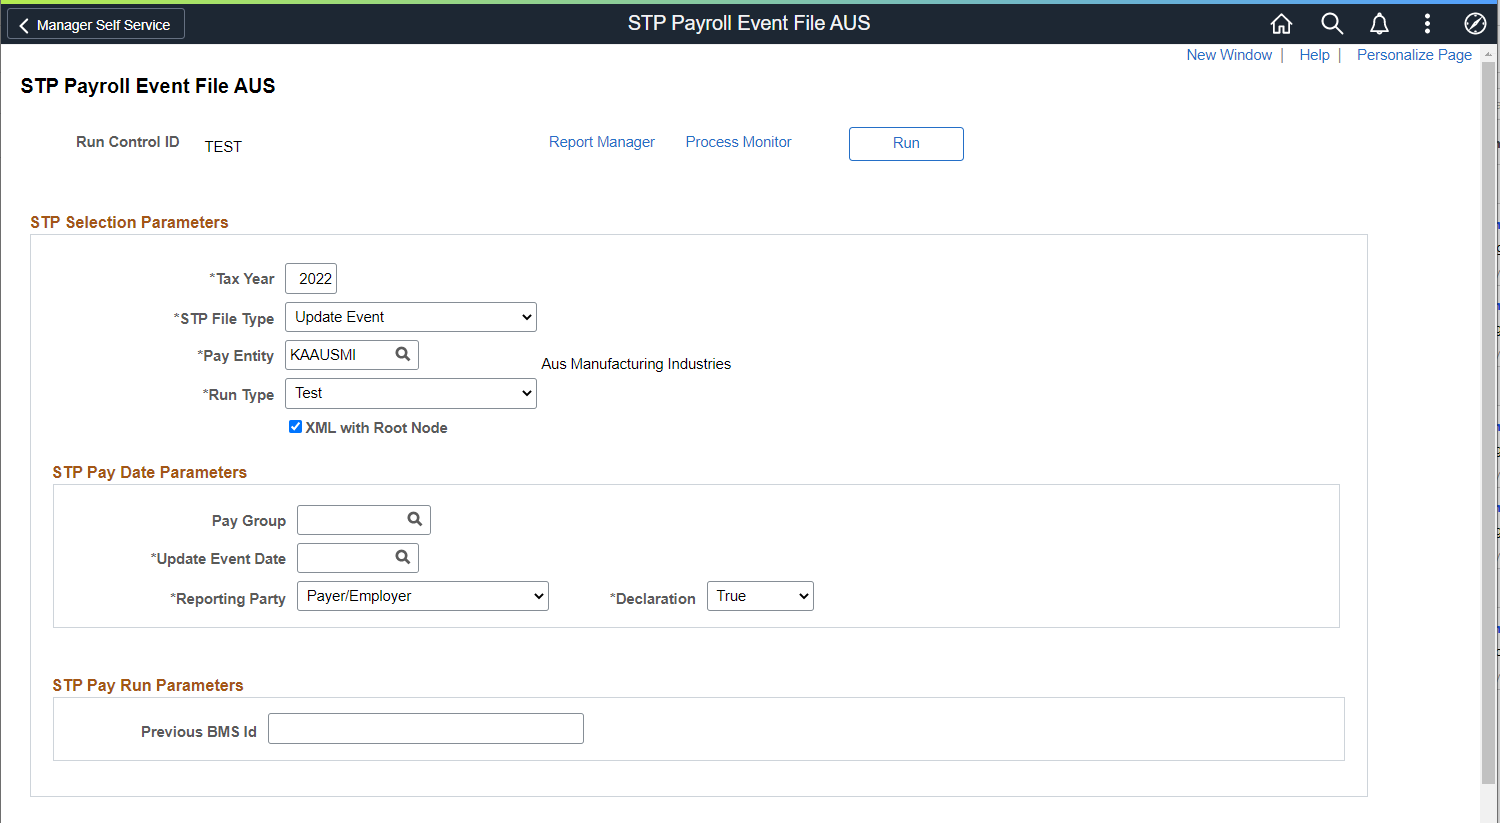 STP Payroll Event File AUS page (1 of 2)